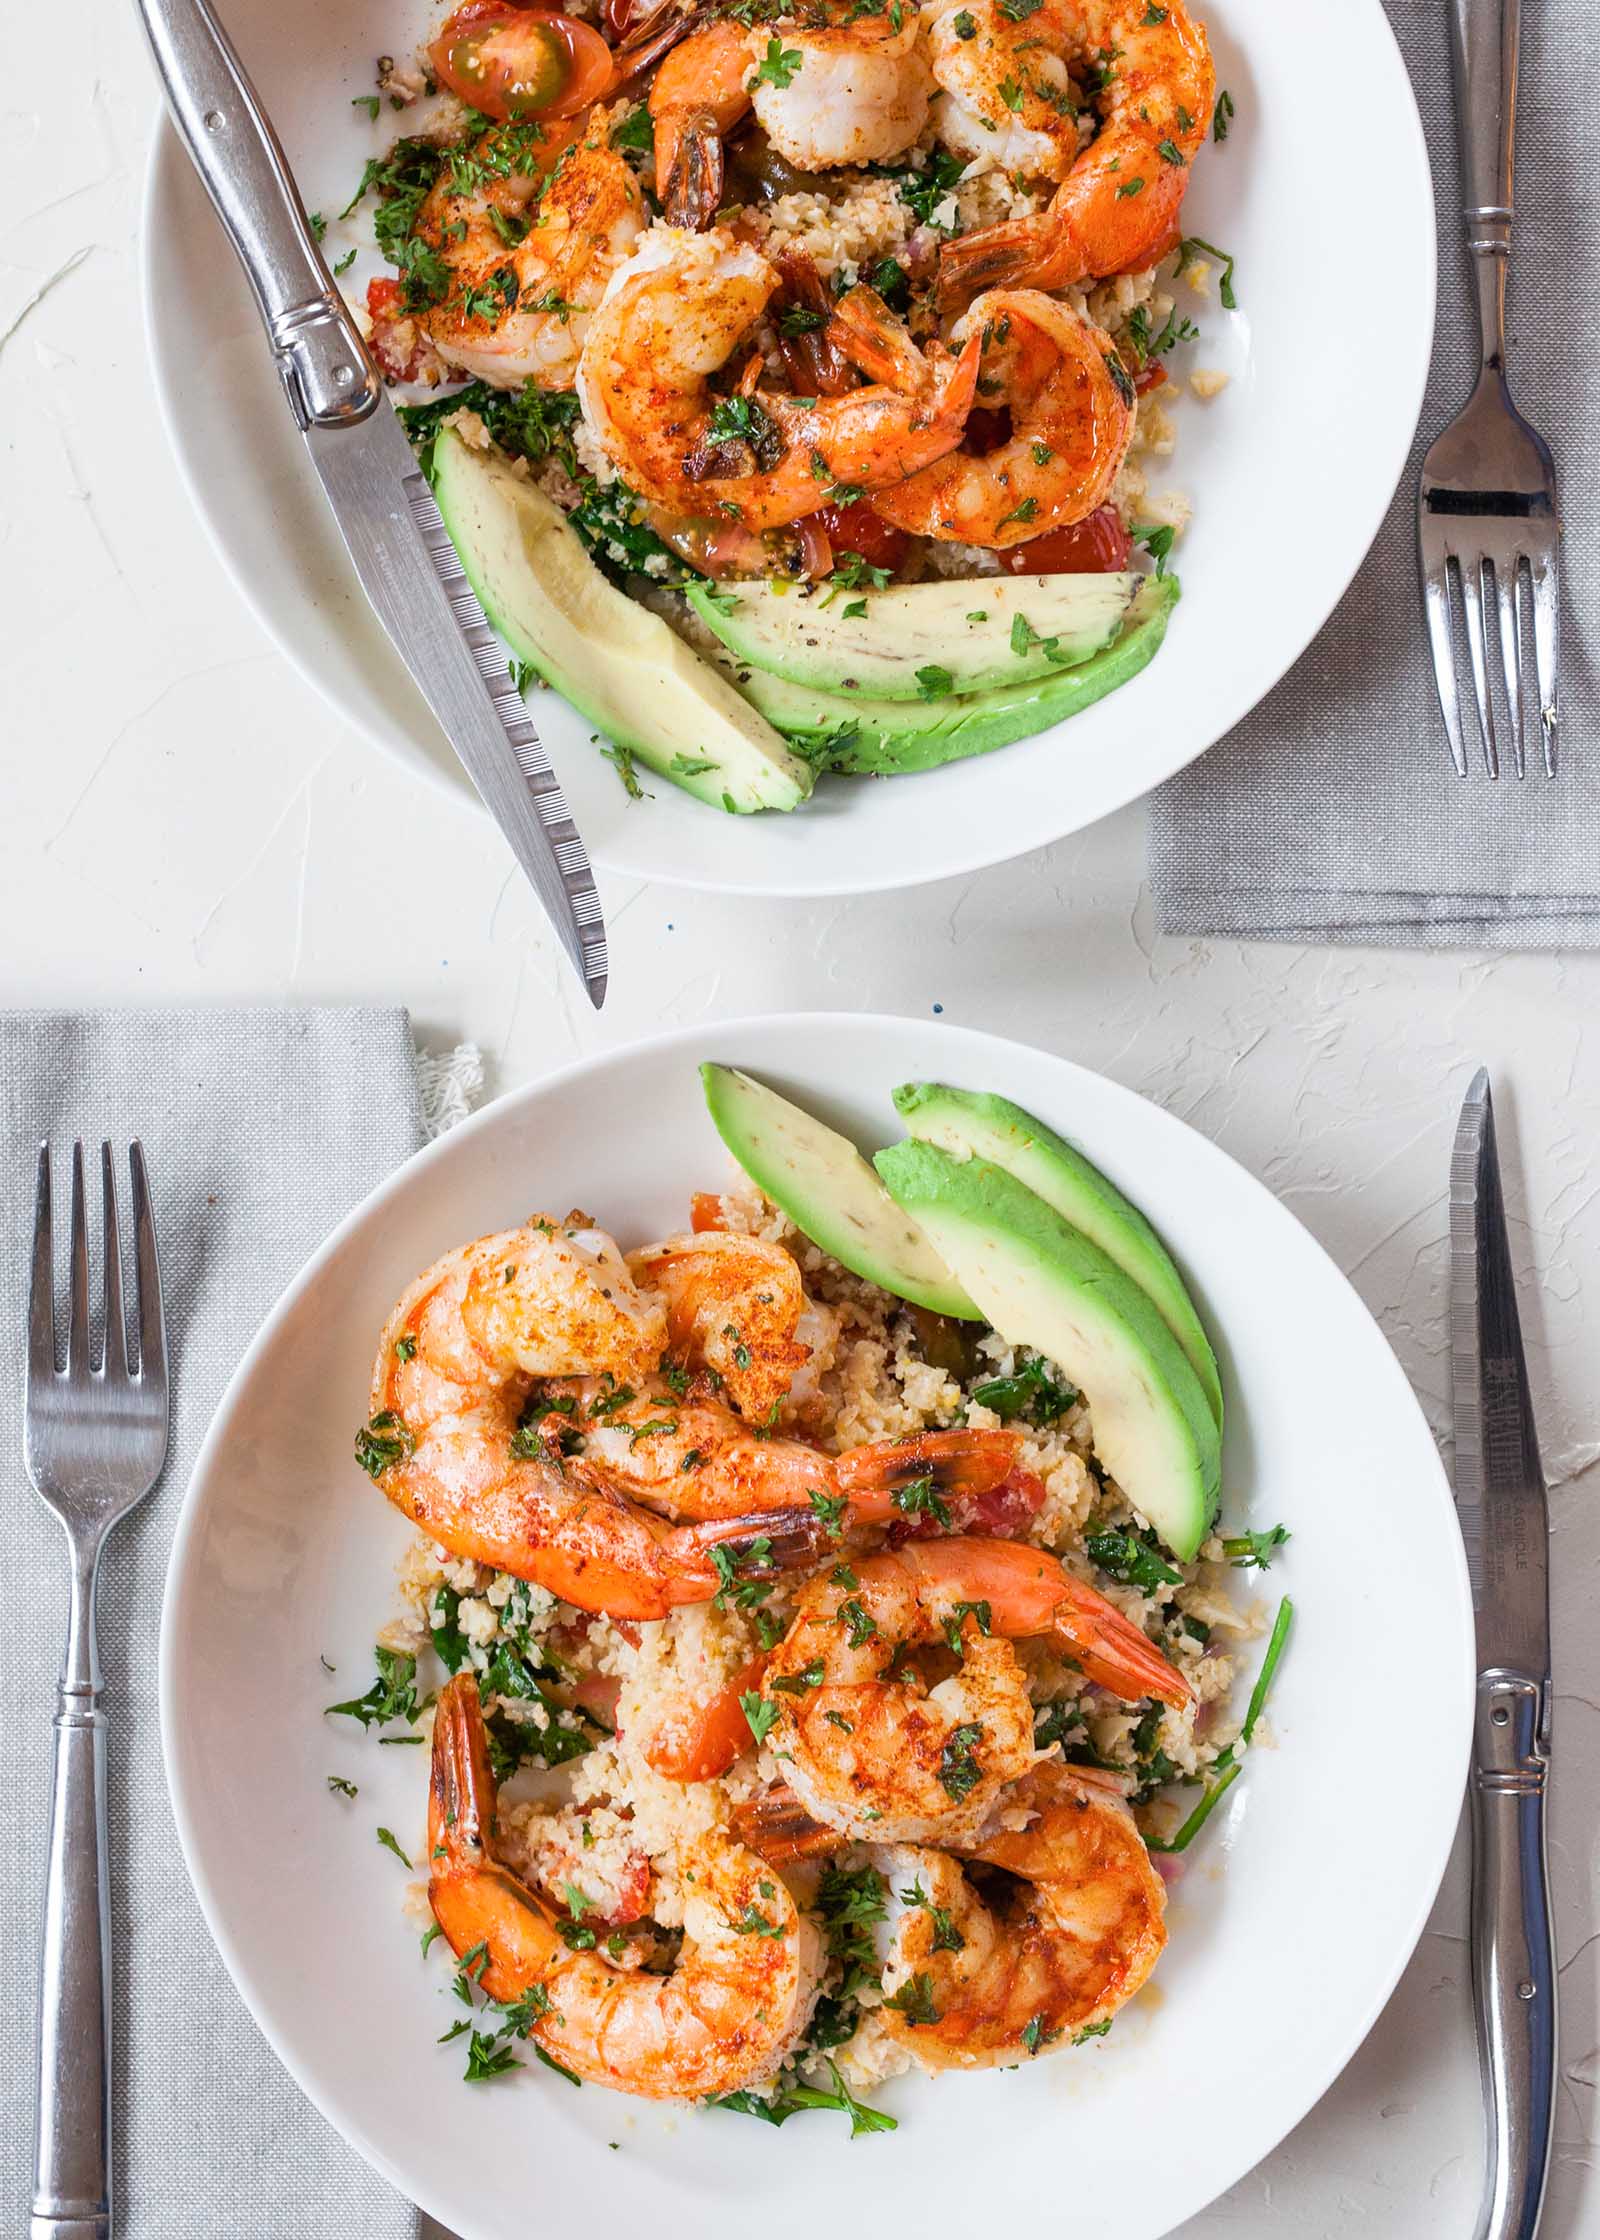 Vertical photo of two table settings of garlic shrimp cauliflower rice bowls. Avocado slices and herbs are in the bowls as well. A fork, knife and napkin are at each place setting.